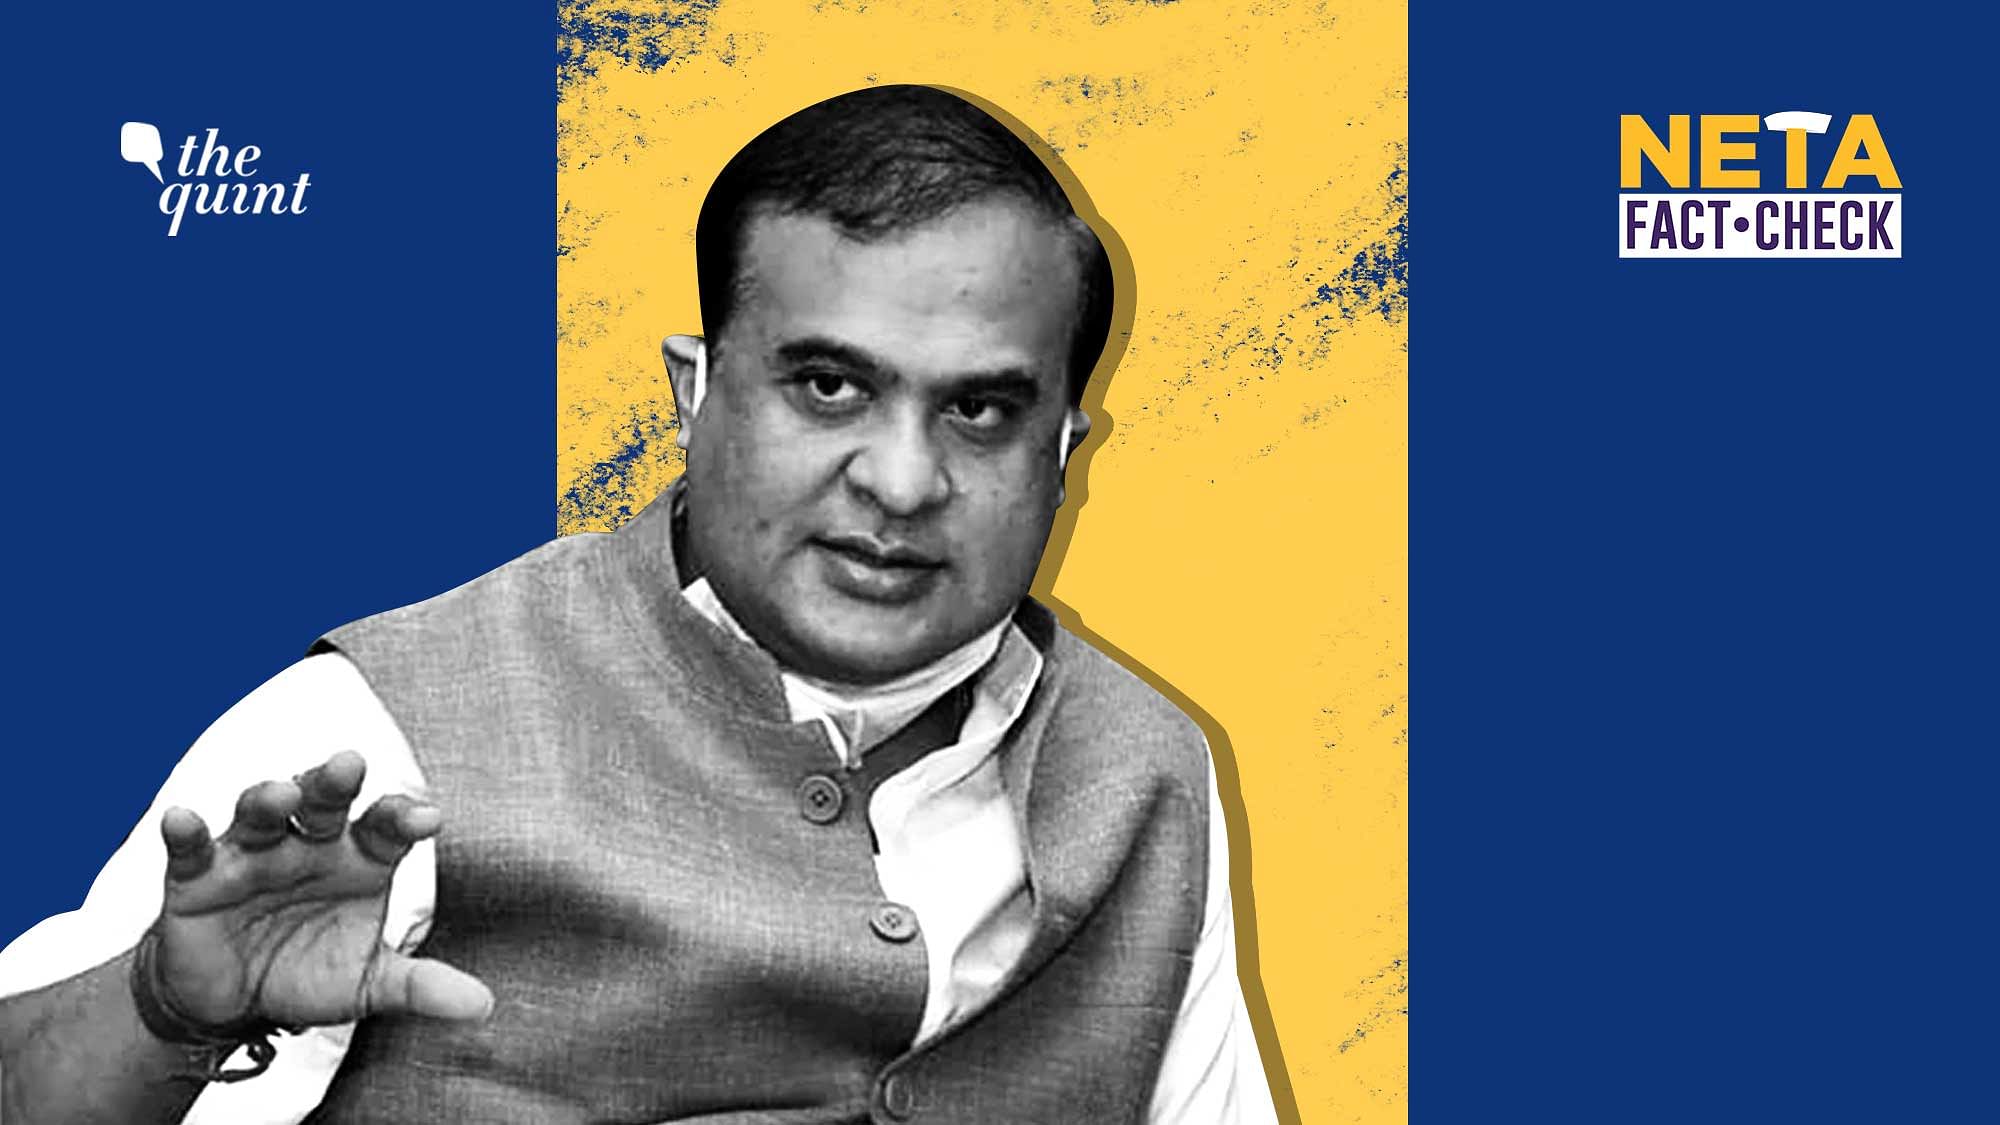 Assam Chief Minister Himanta Biswa Sarma said that the Muslims in the state should adopt measures for “family planning”.